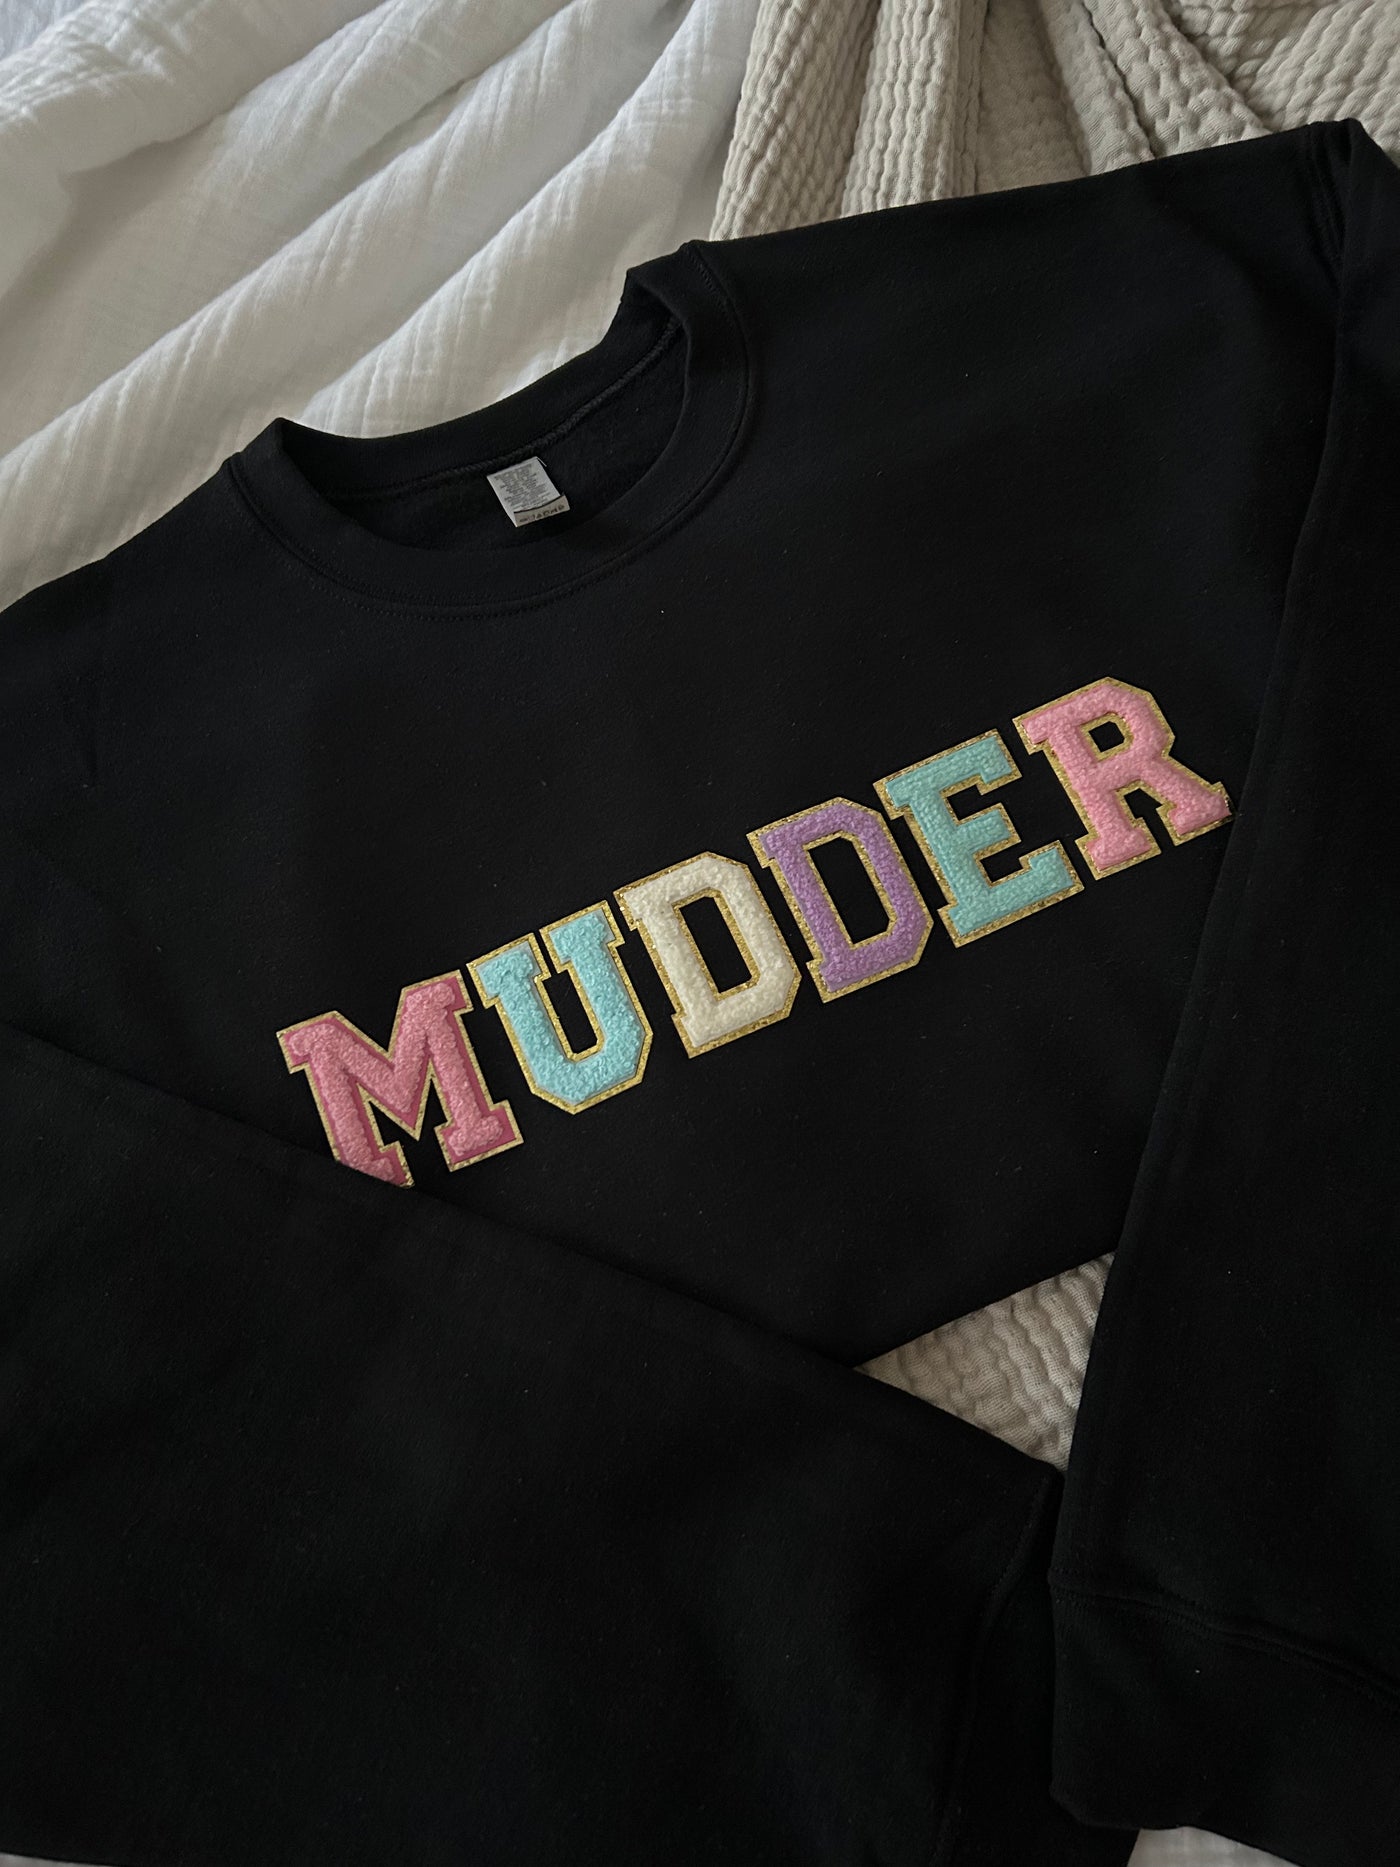 "MUDDER" *PRE ORDER* (Expected Completion Early/Mid June) Chenille Patch Unisex Crewneck